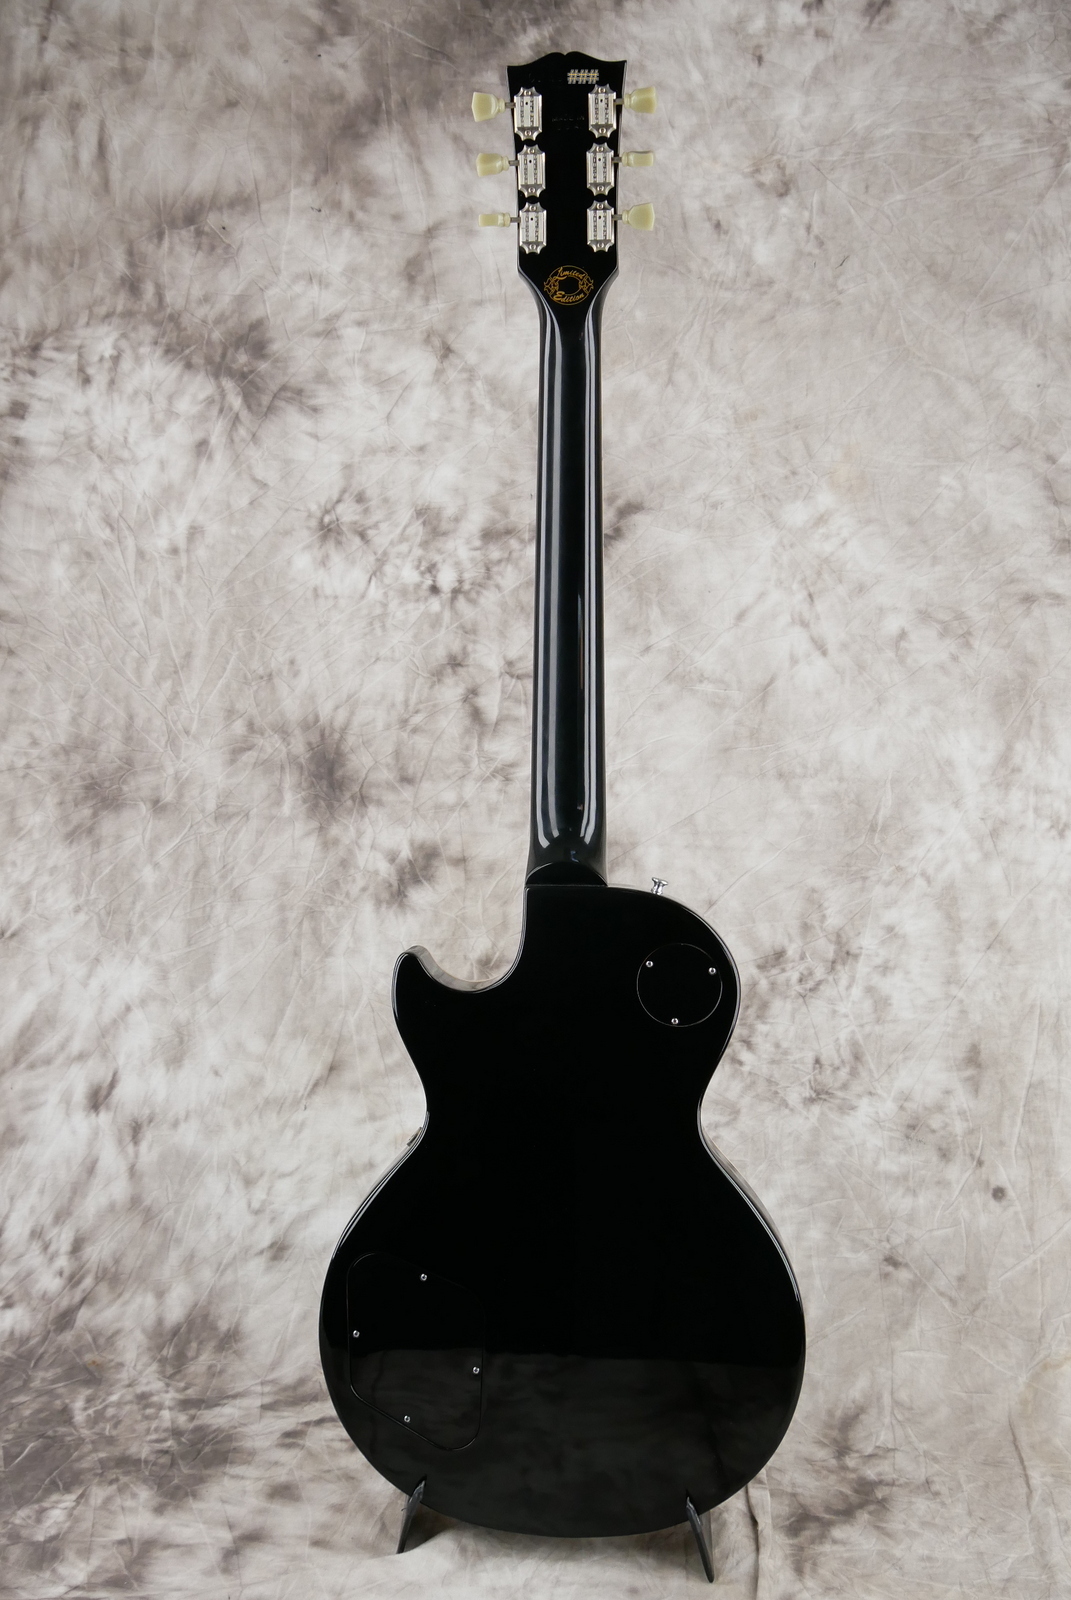 img/vintage/5337/Gibson_Les_Paul_Deluxe_limited_edtion_black_2000-002.JPG